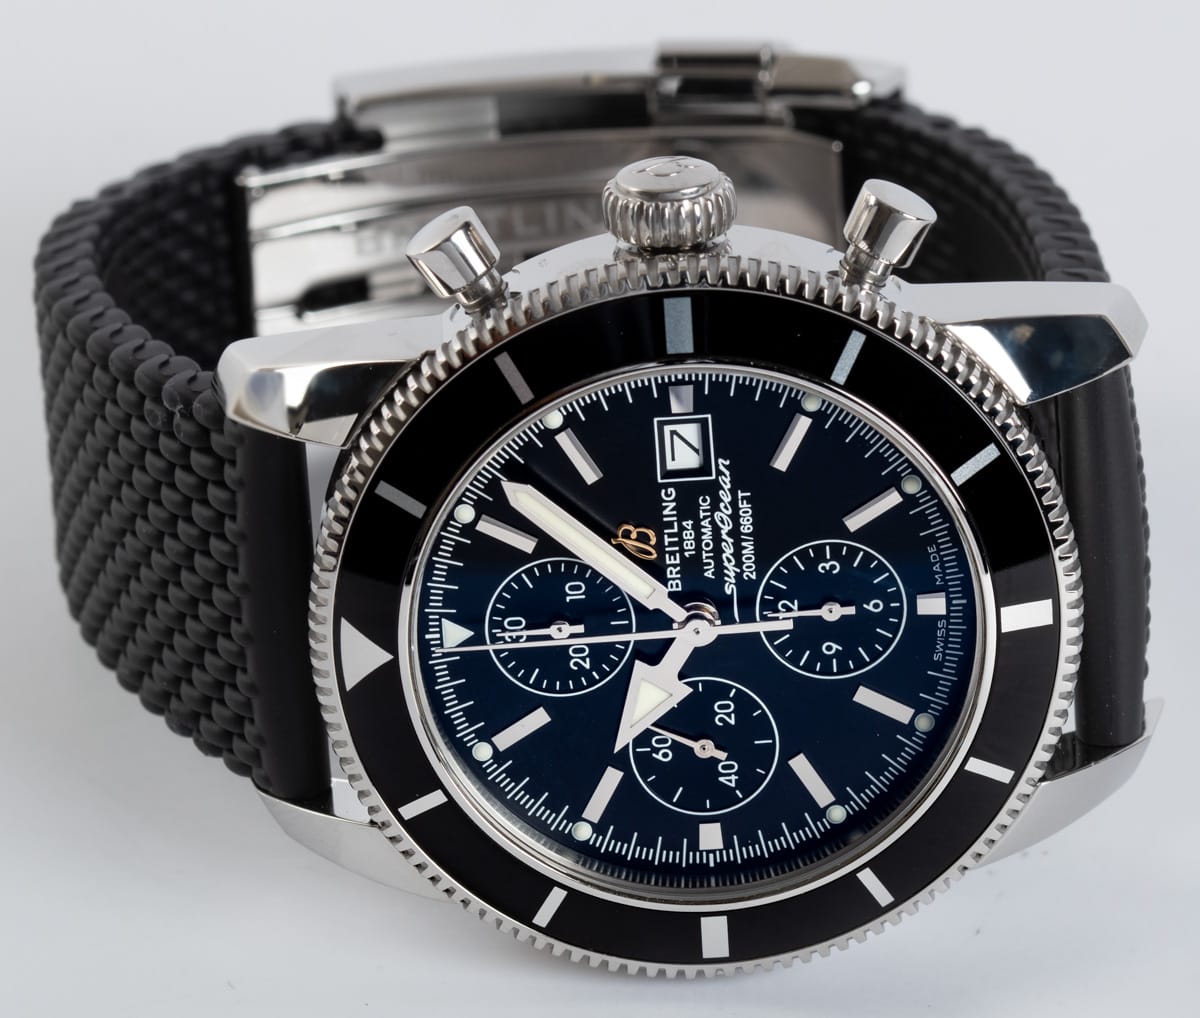 Front View of SuperOcean Heritage Chronograph